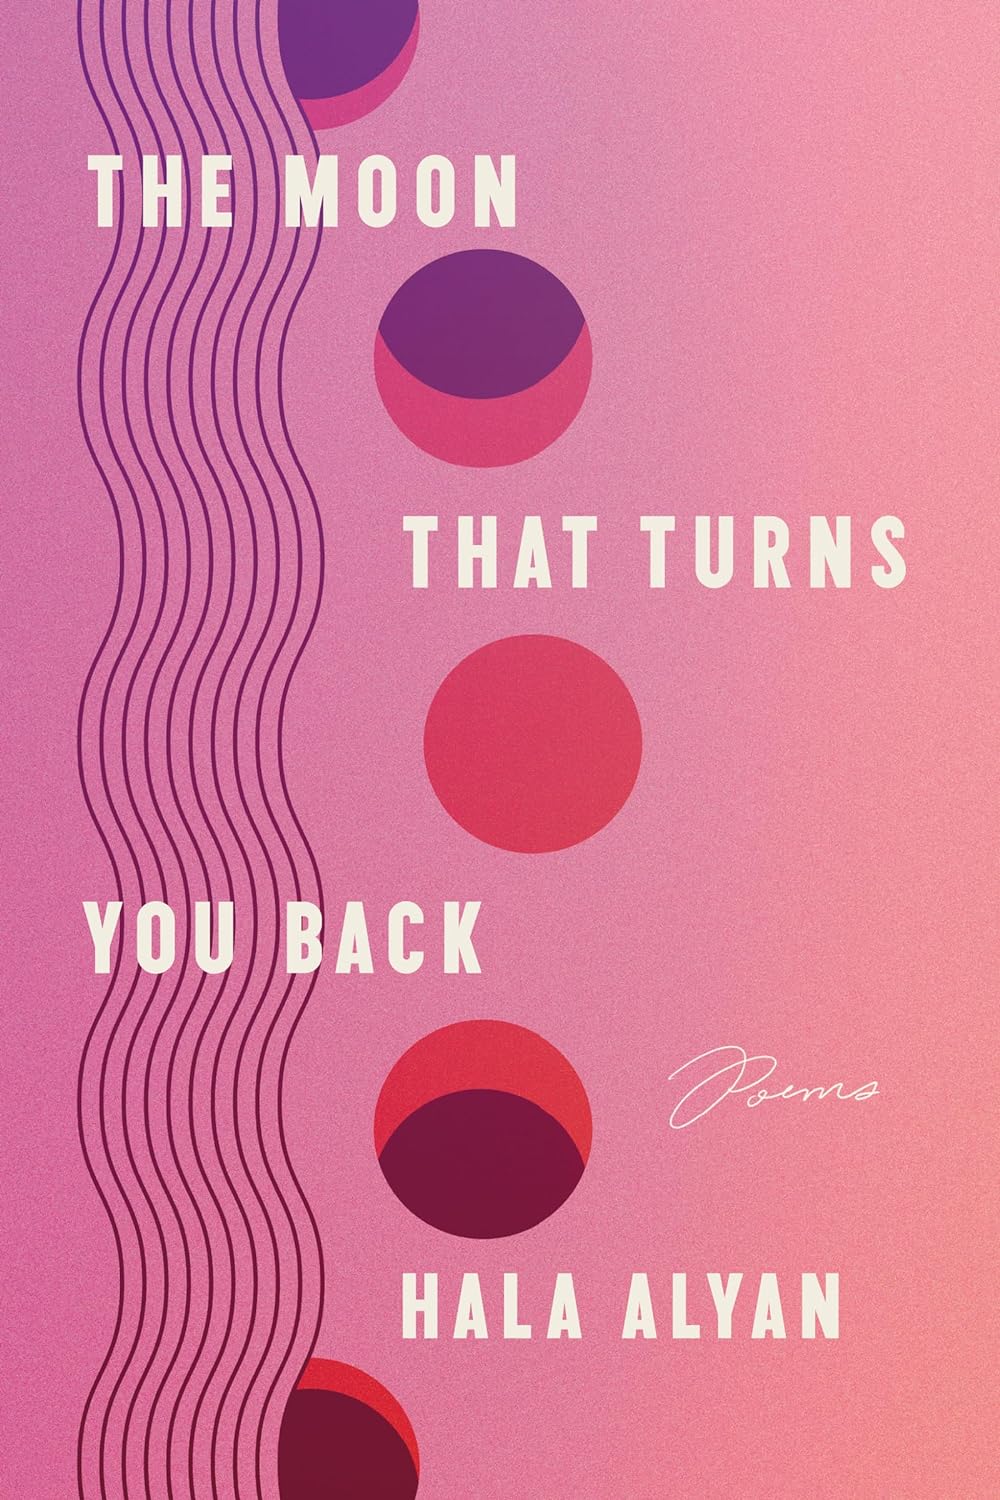 The Moon That Turns You Back // Poems